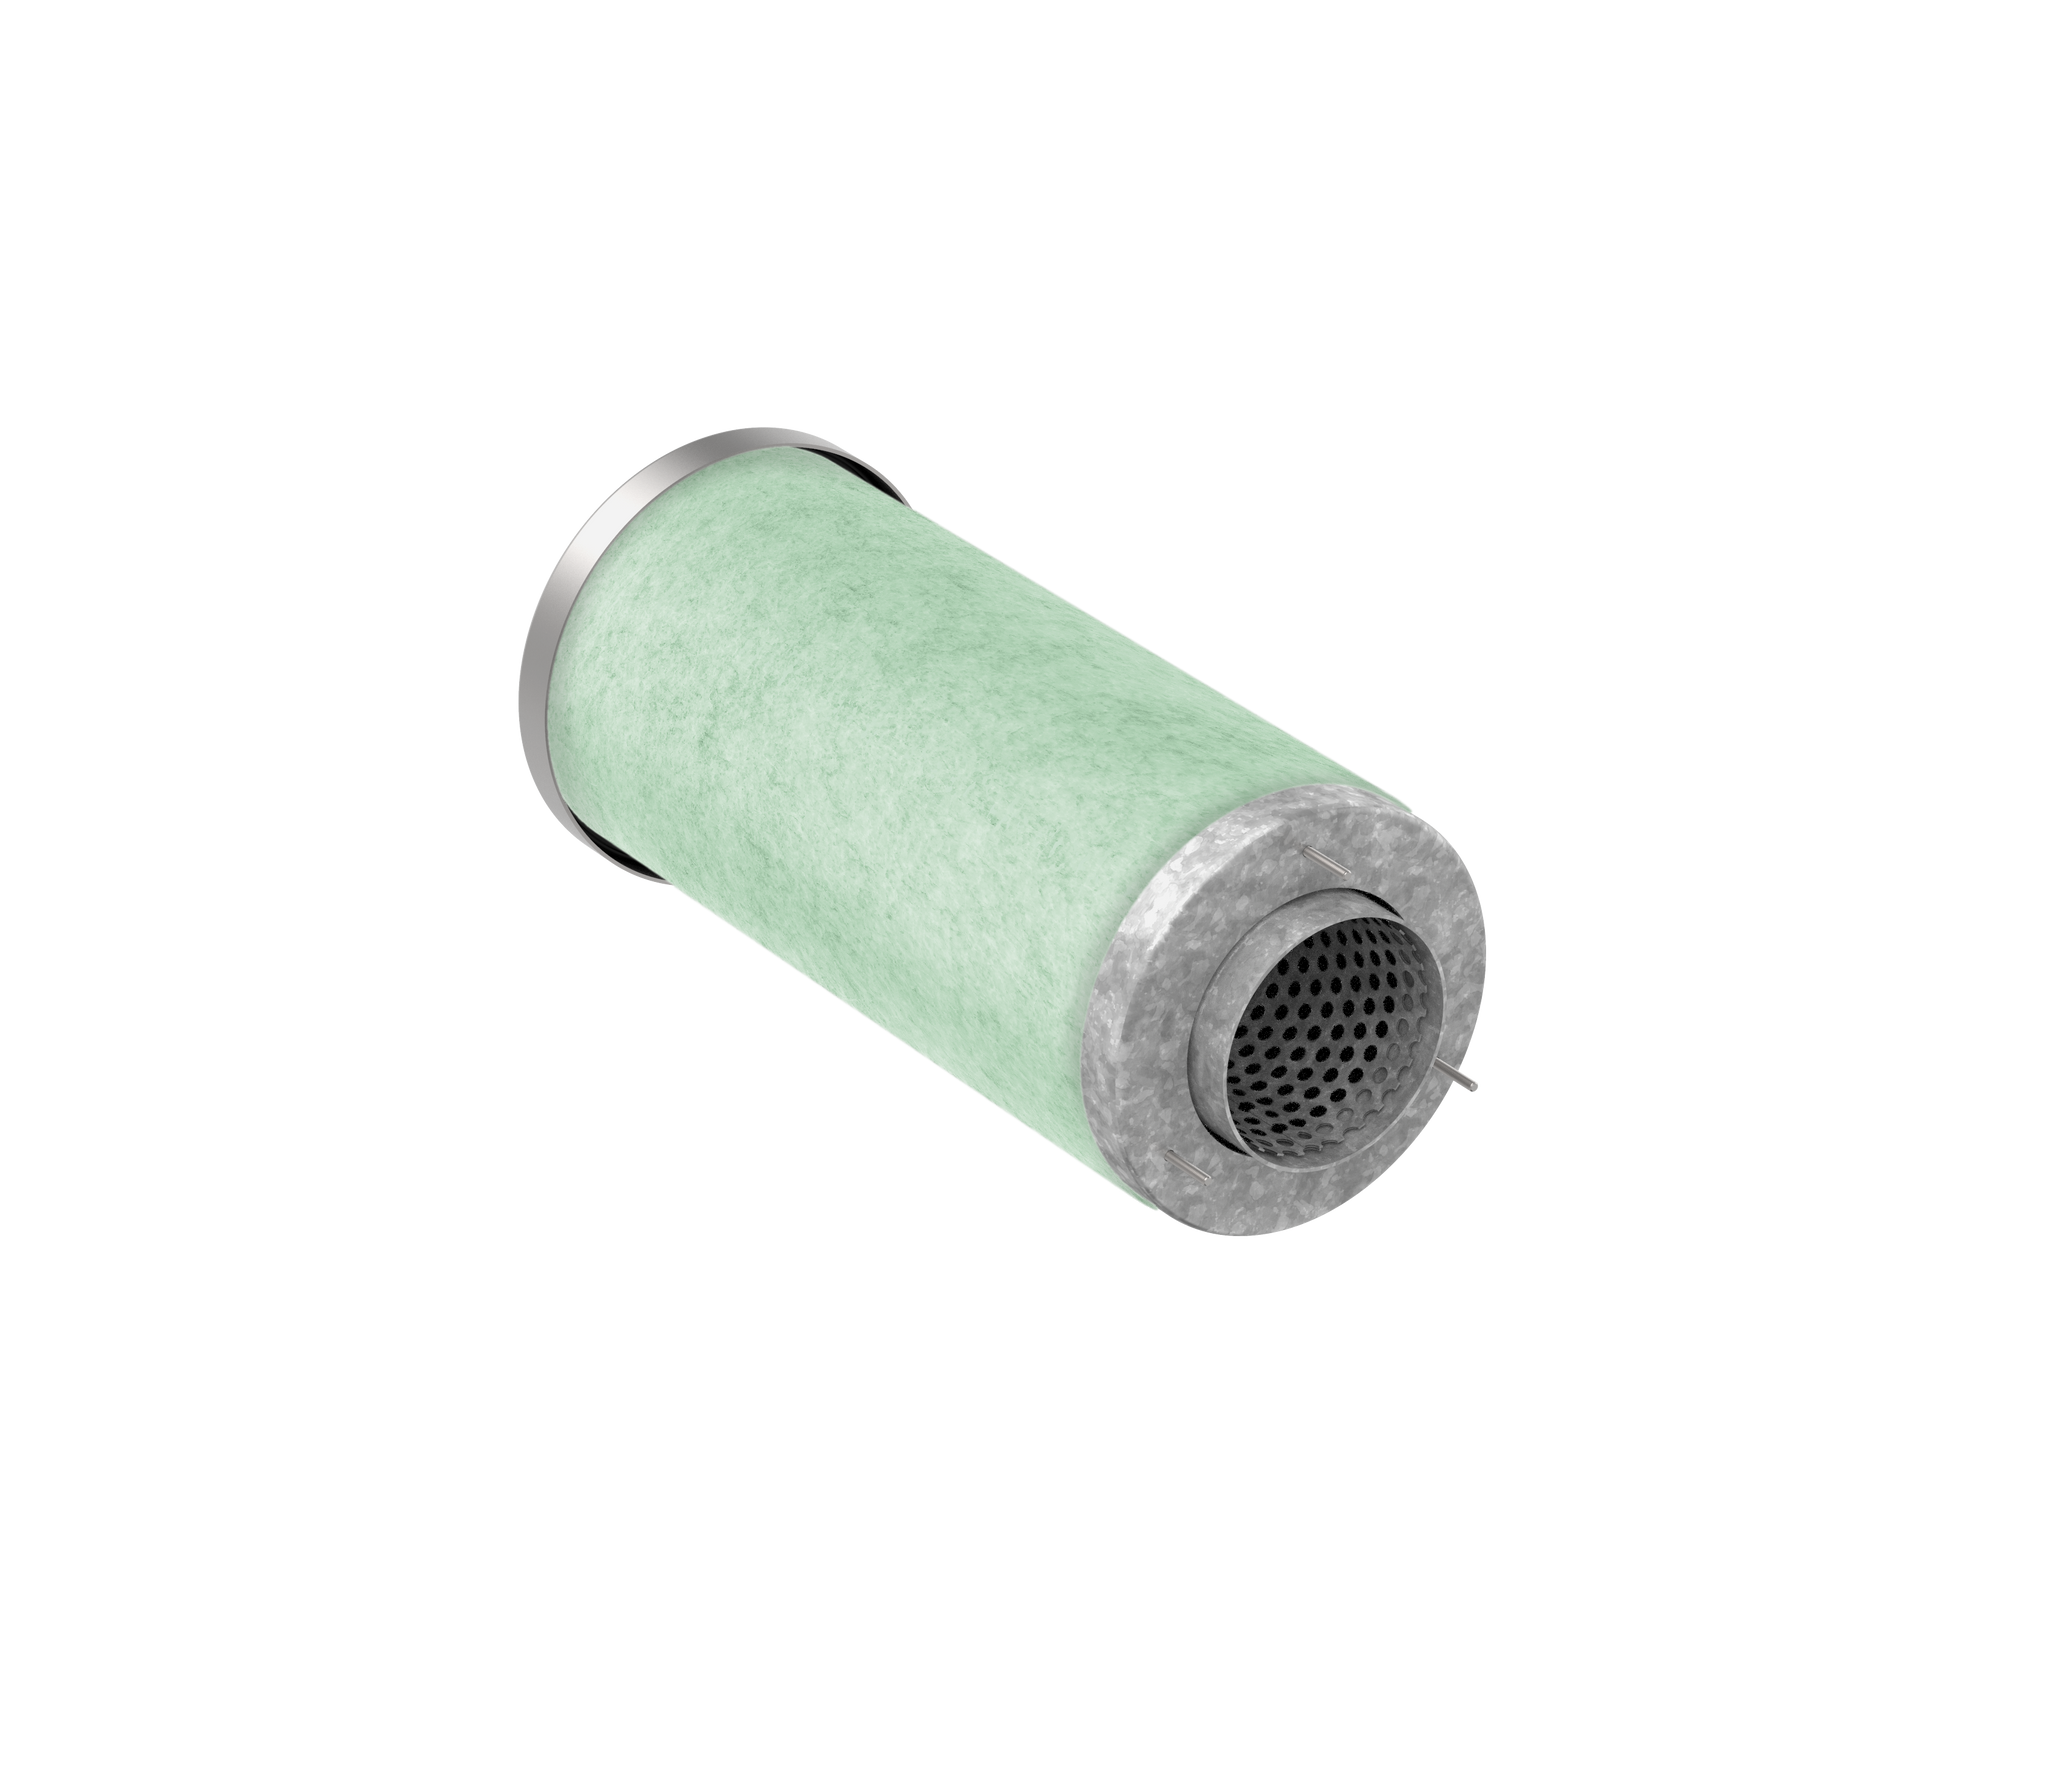 Carbon Cartridge Filter 420 I | Nutrient Growth Systems Canada